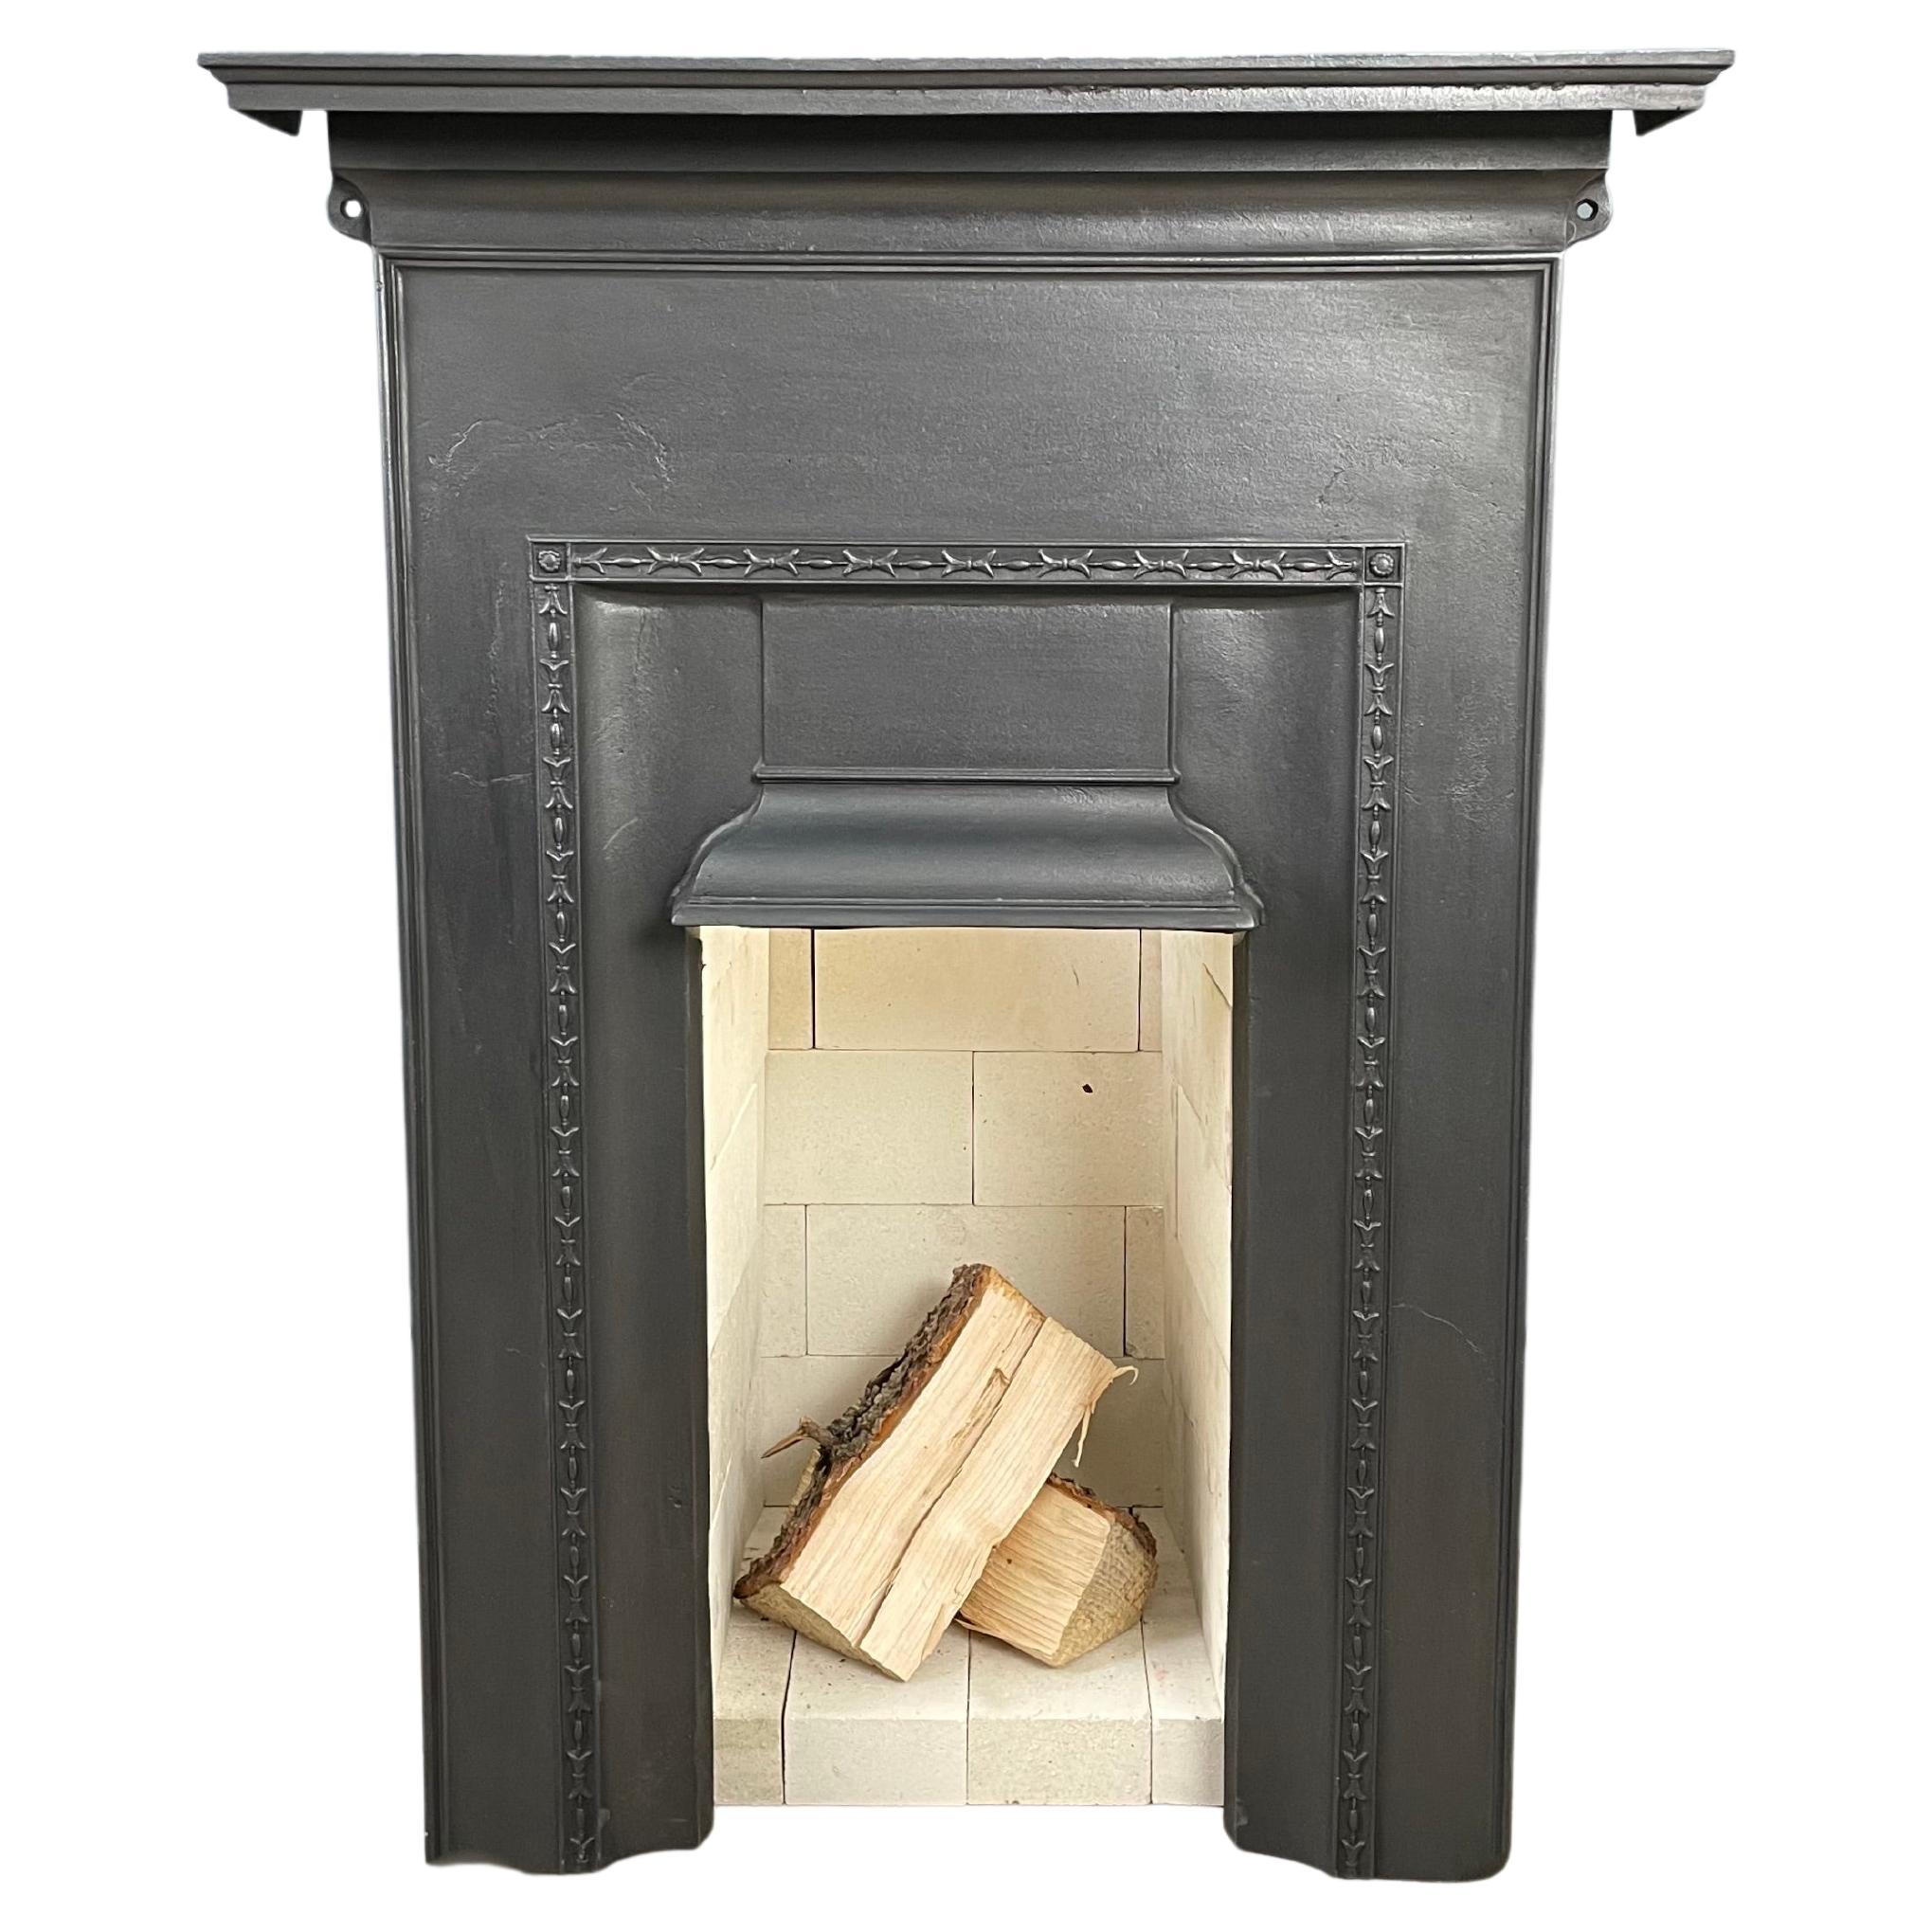 Antique English Cast Iron Fireplace Including Refractory Brick Insert For Sale